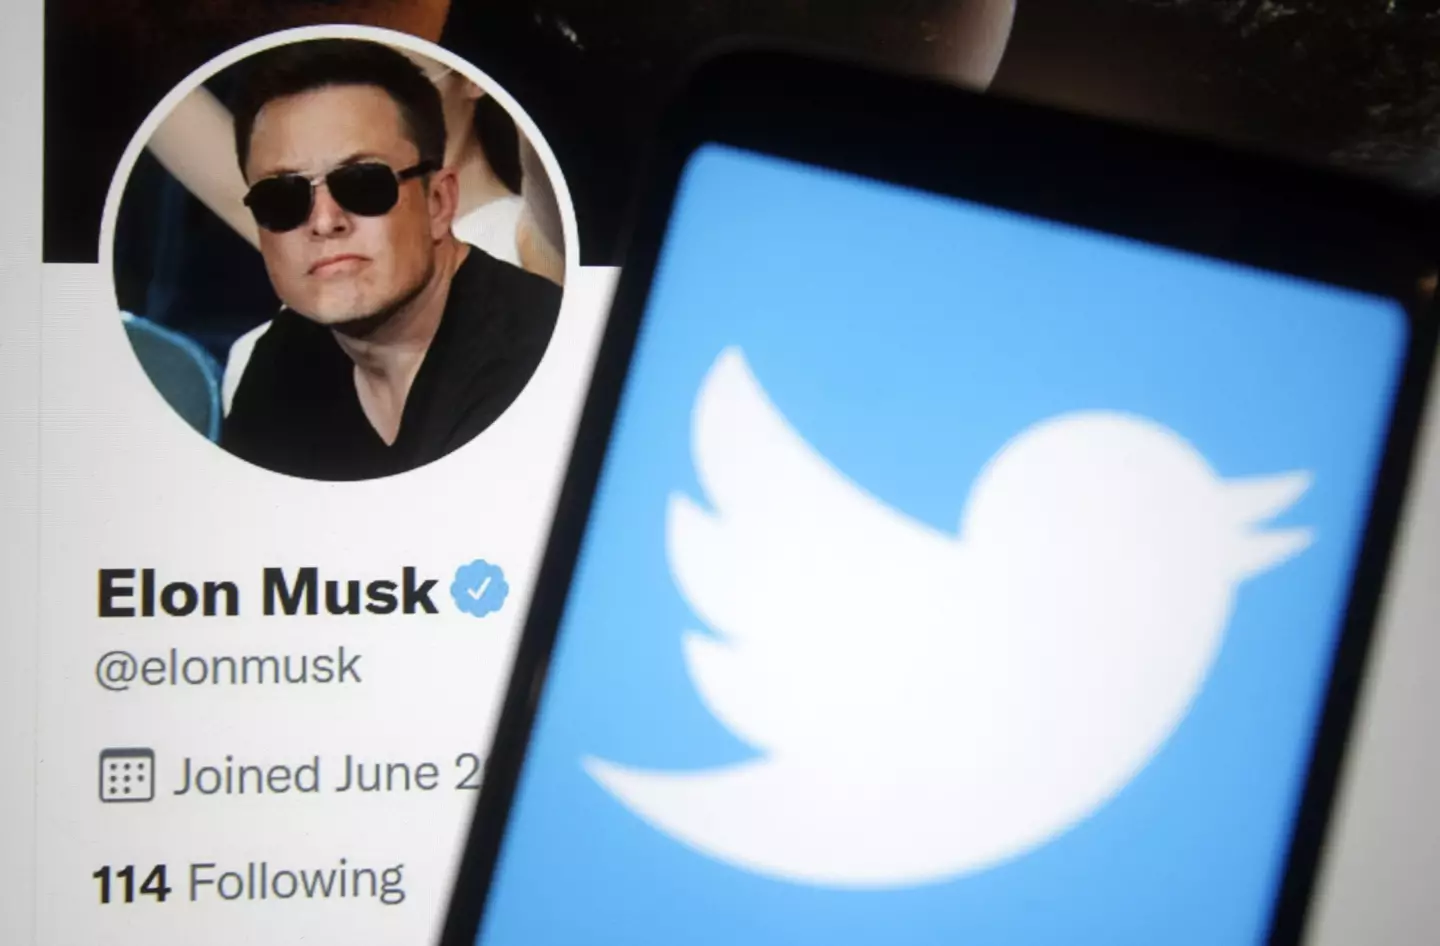 Musk says he wants Twitter to be a place for free speech.